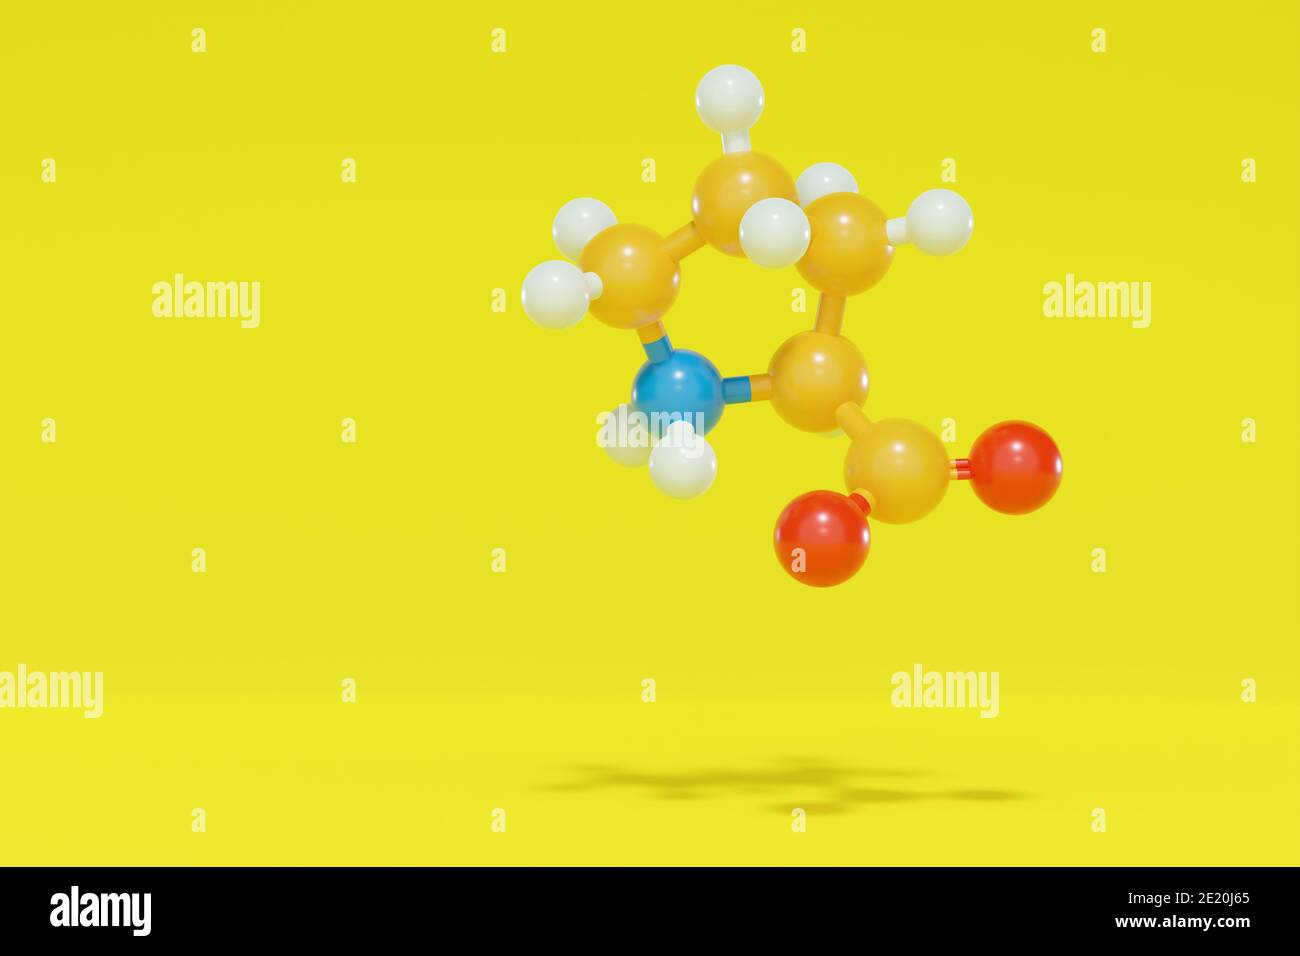 Proline (l-proline, Pro) amino acid molecule. 3D rendering. Ball and stick molecular model with atoms shown as color-coded spheres: hydrogen (white), Stock Photo